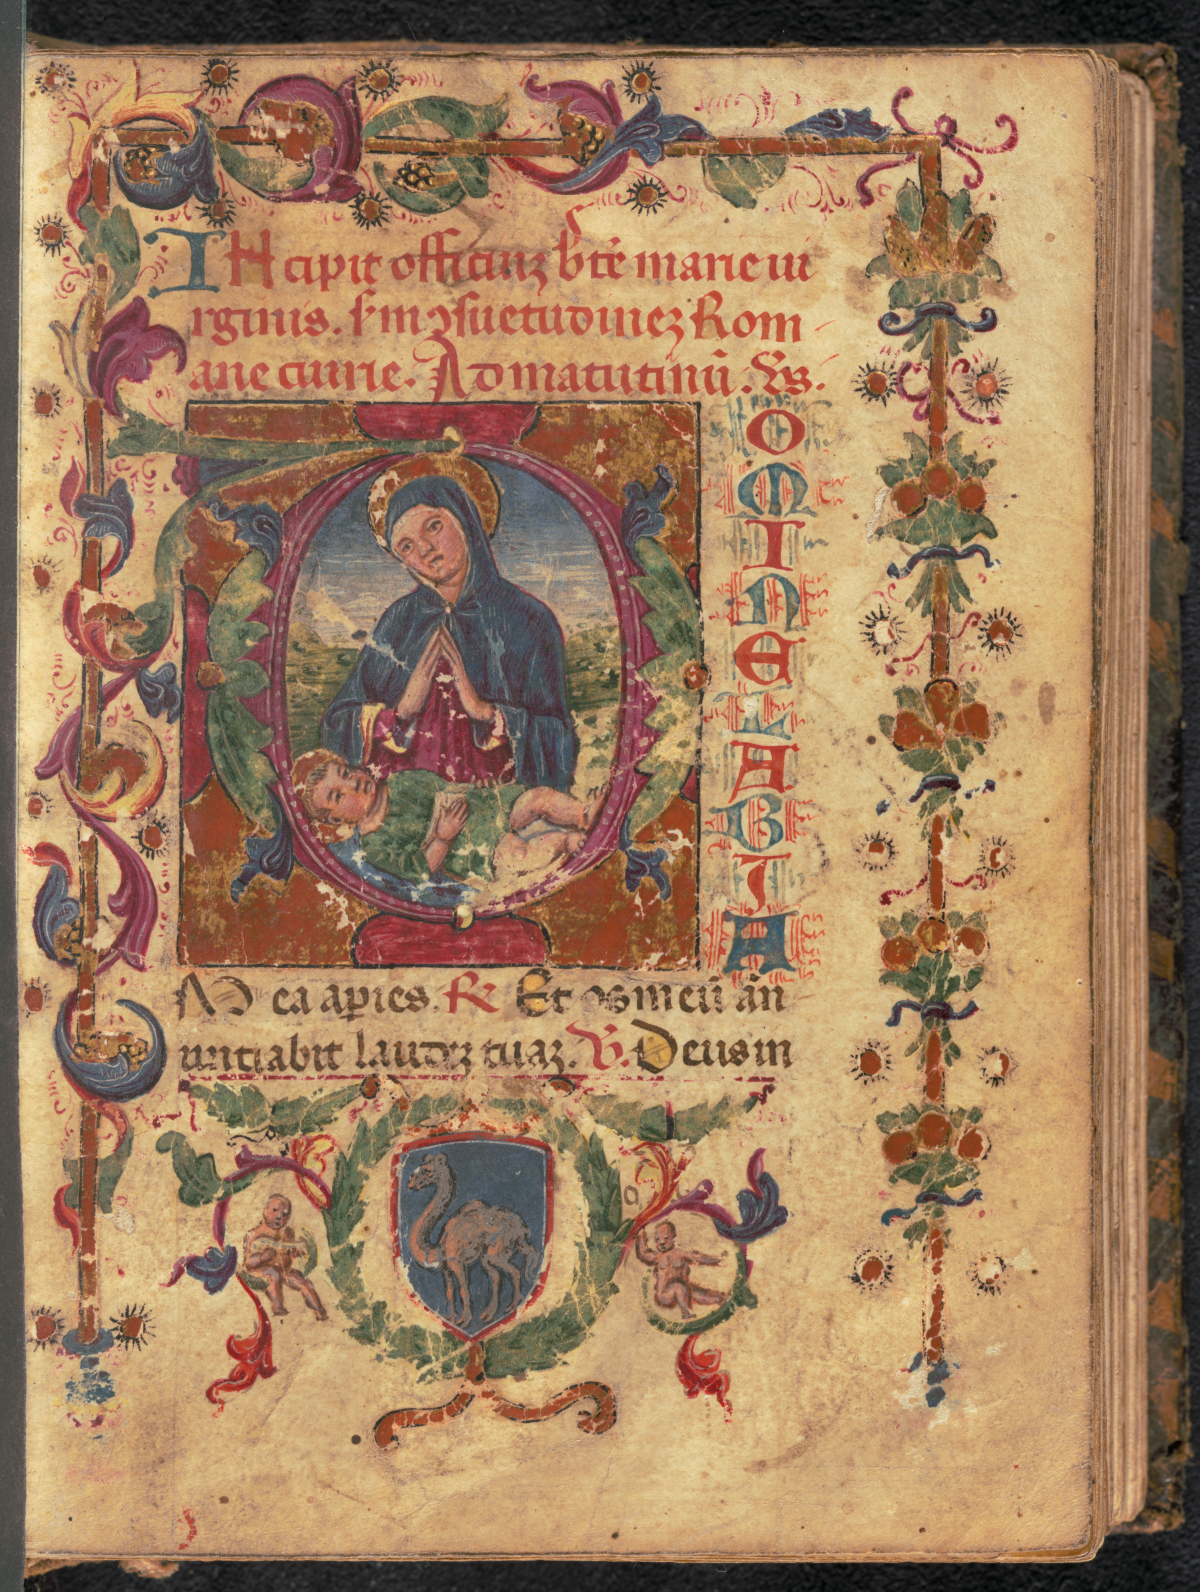 A highly decorated page from an old book. The border is brightly coloured with floral imagery. In the middle of a page is a hand drawn image of a woman framed in a circular frame. There is text written in red ink.